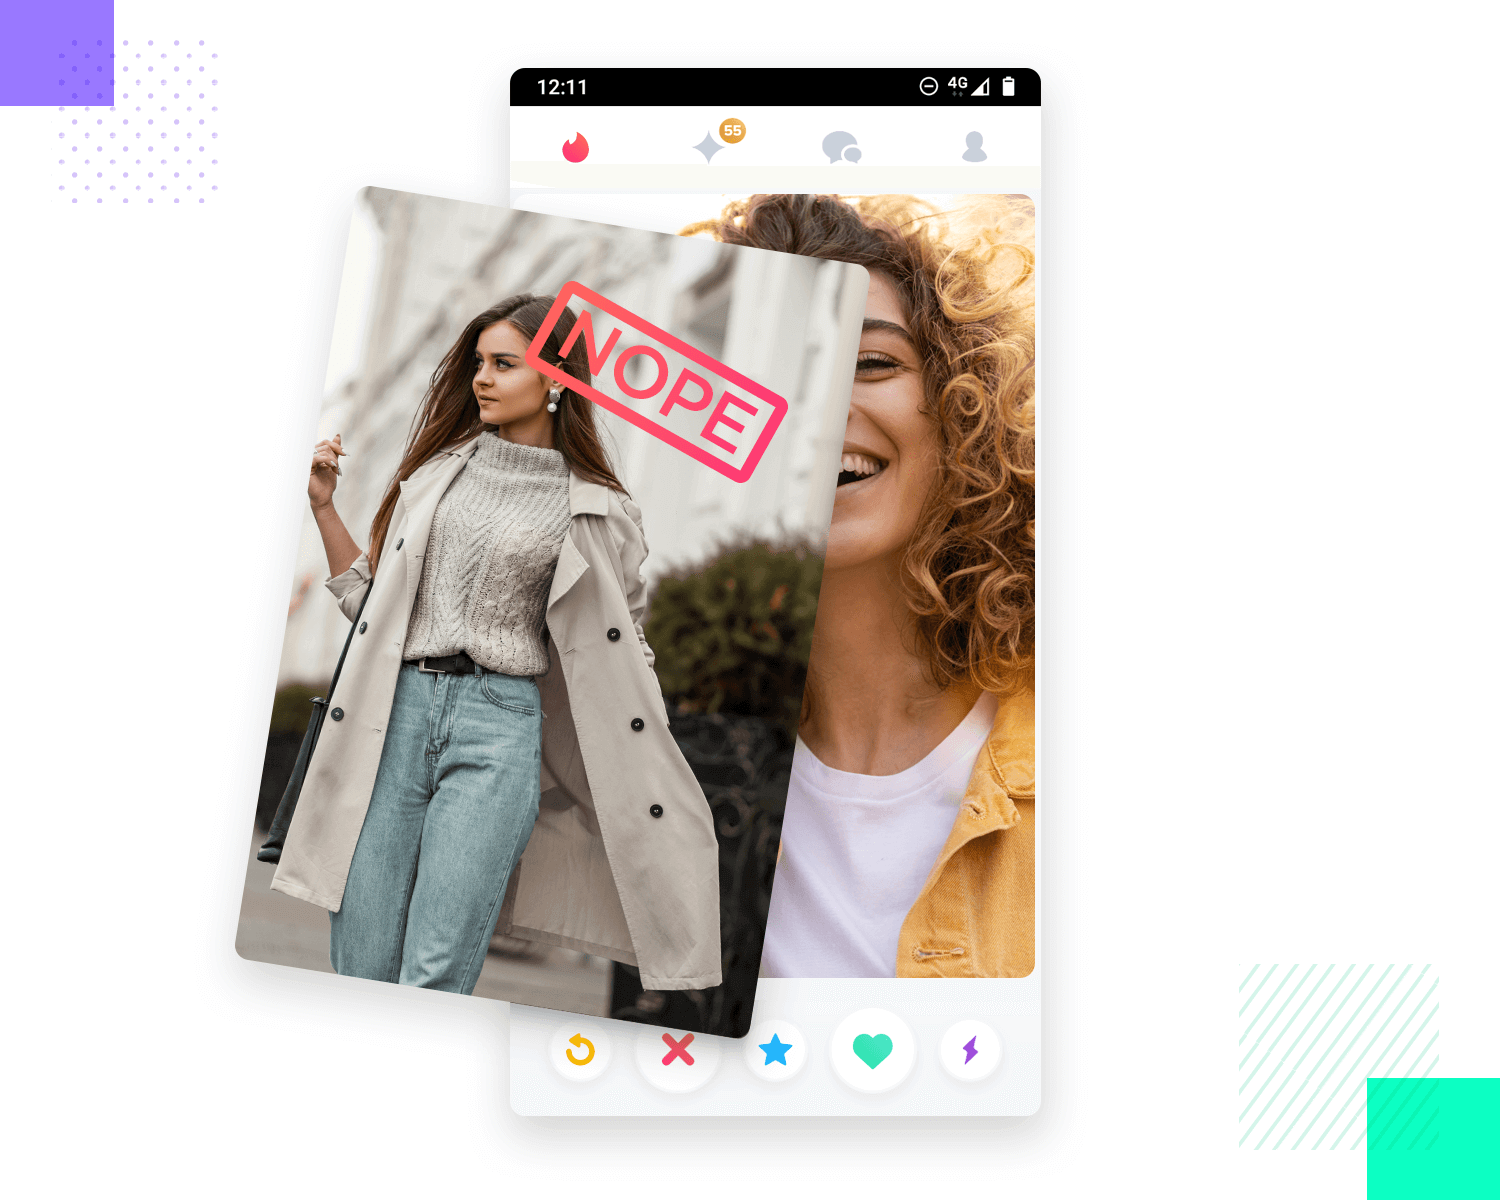 example of gesture-based navigation from tinder